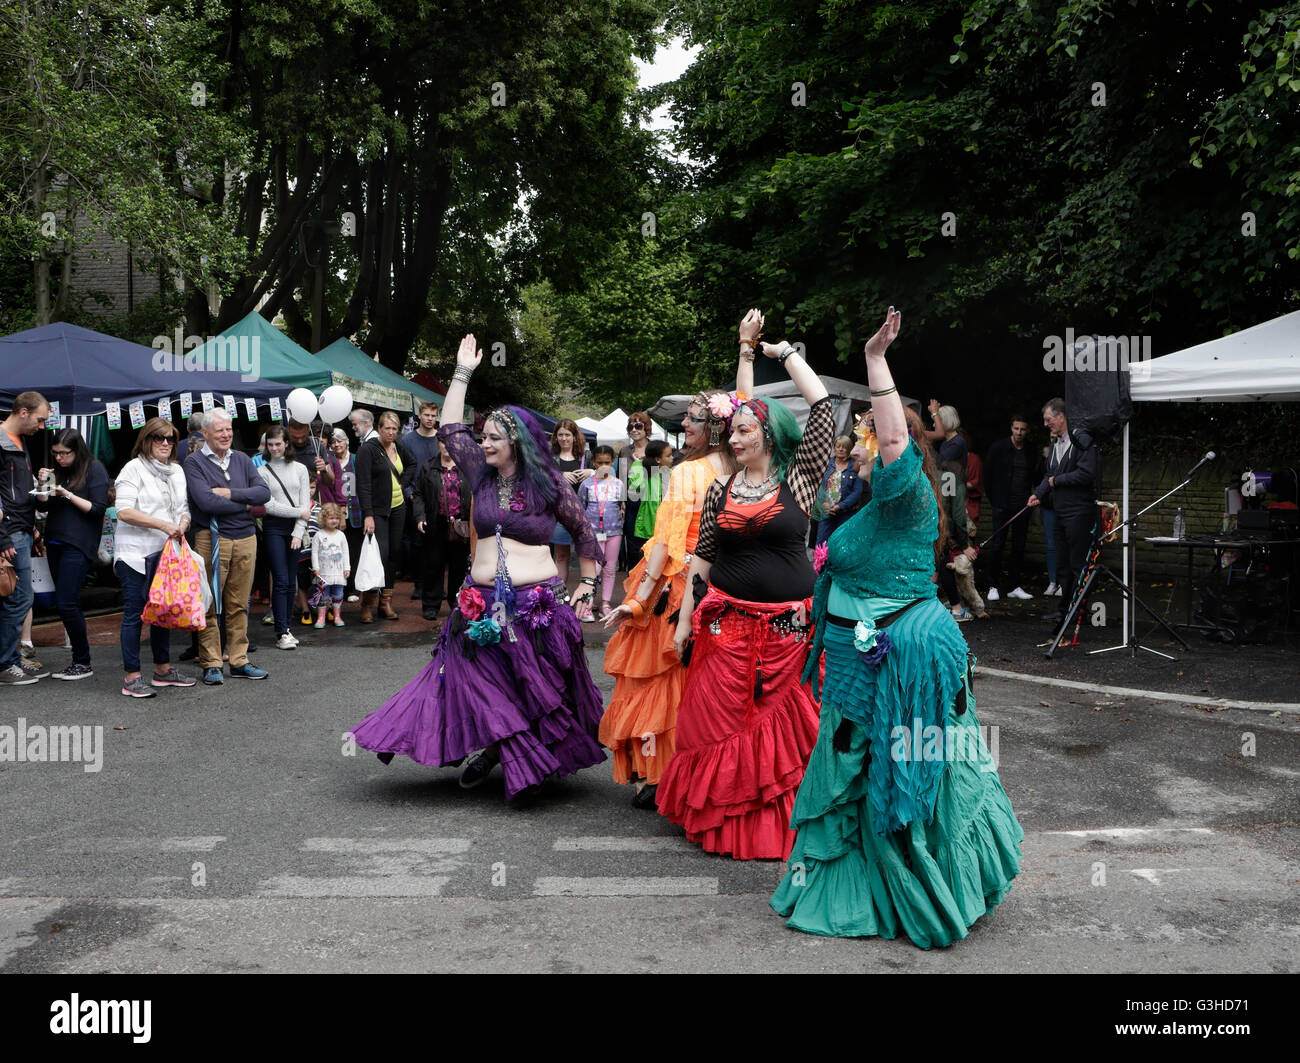 Boomshanka Belly dancers performing at the Nether Edge farmers market in Sheffield England June 2016 bellydancing belly dancing Stock Photo